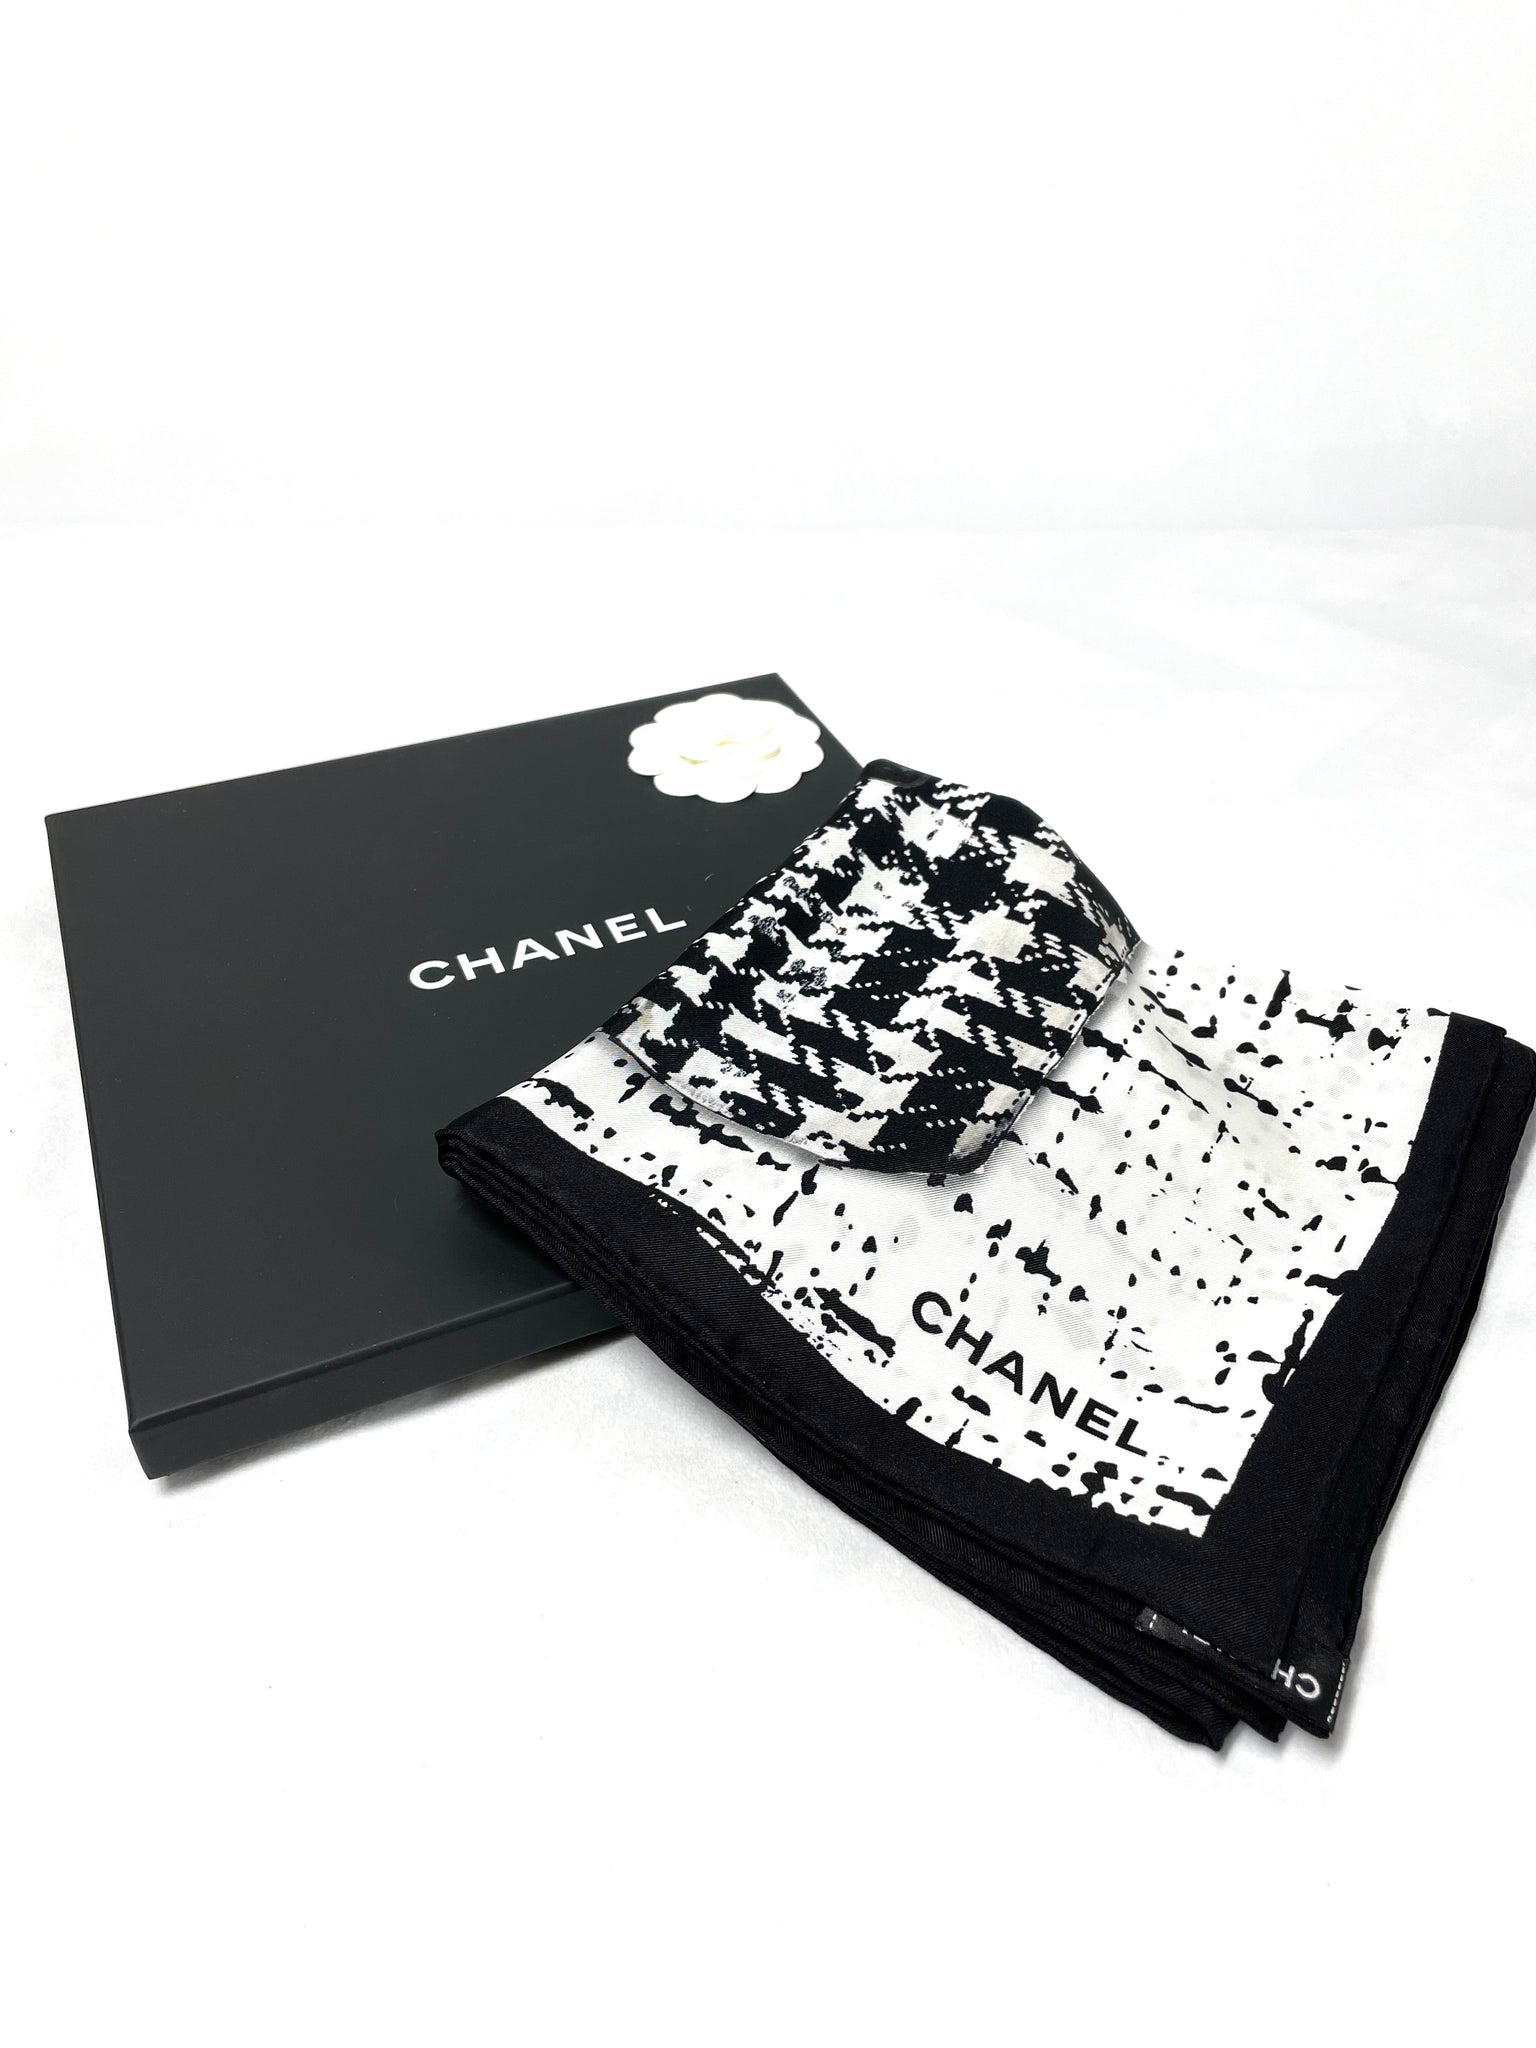 Photo of Chanel 100% Silk Scarf in Black and White Print available at UniKoncept in Waterloo